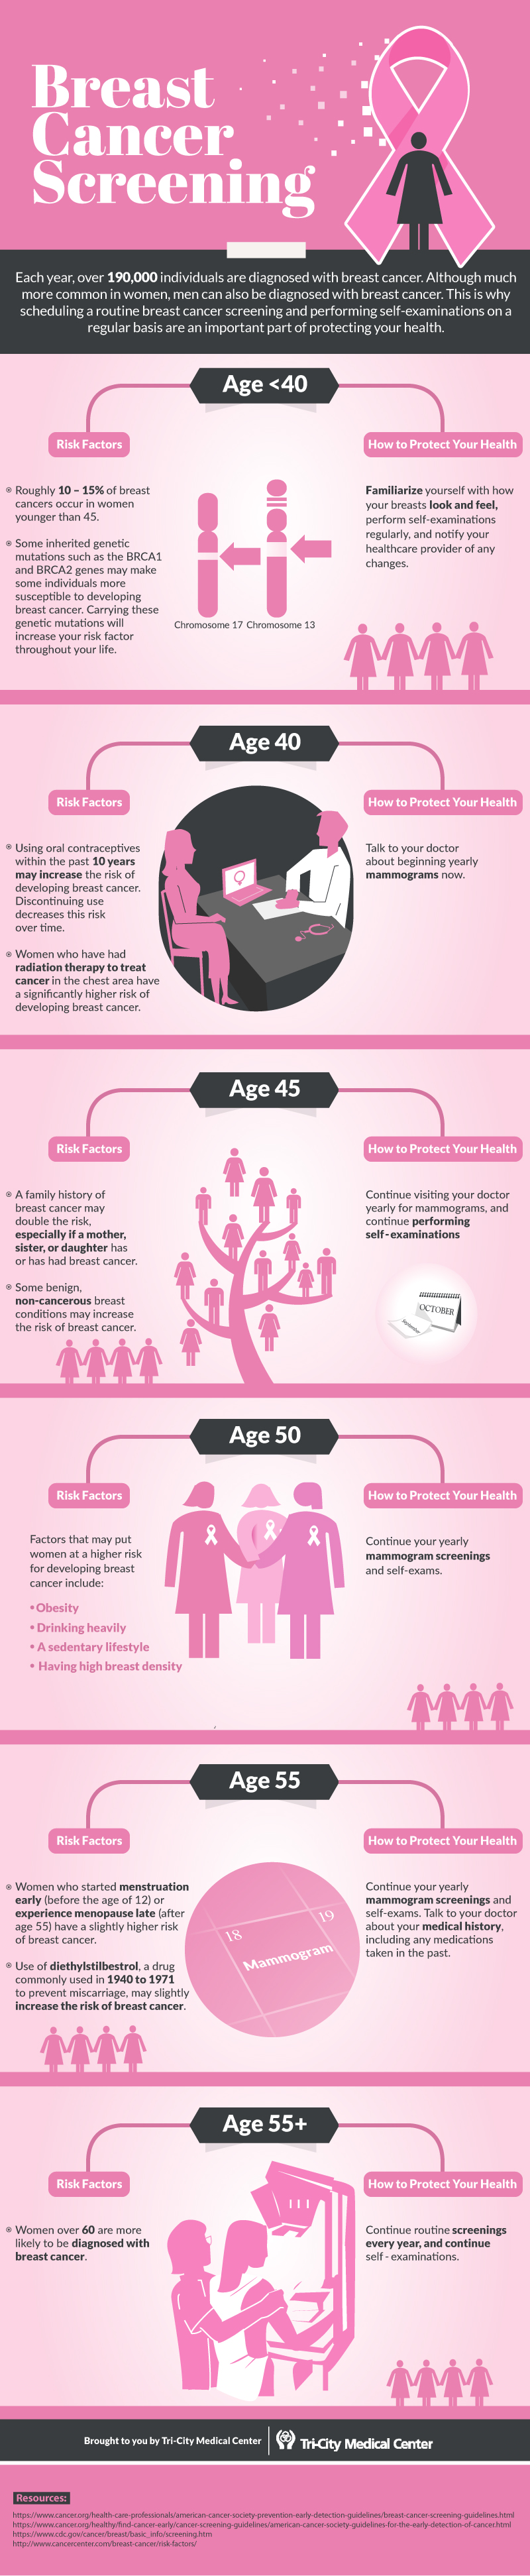 Infographic displaying the process of getting a breast cancer screening